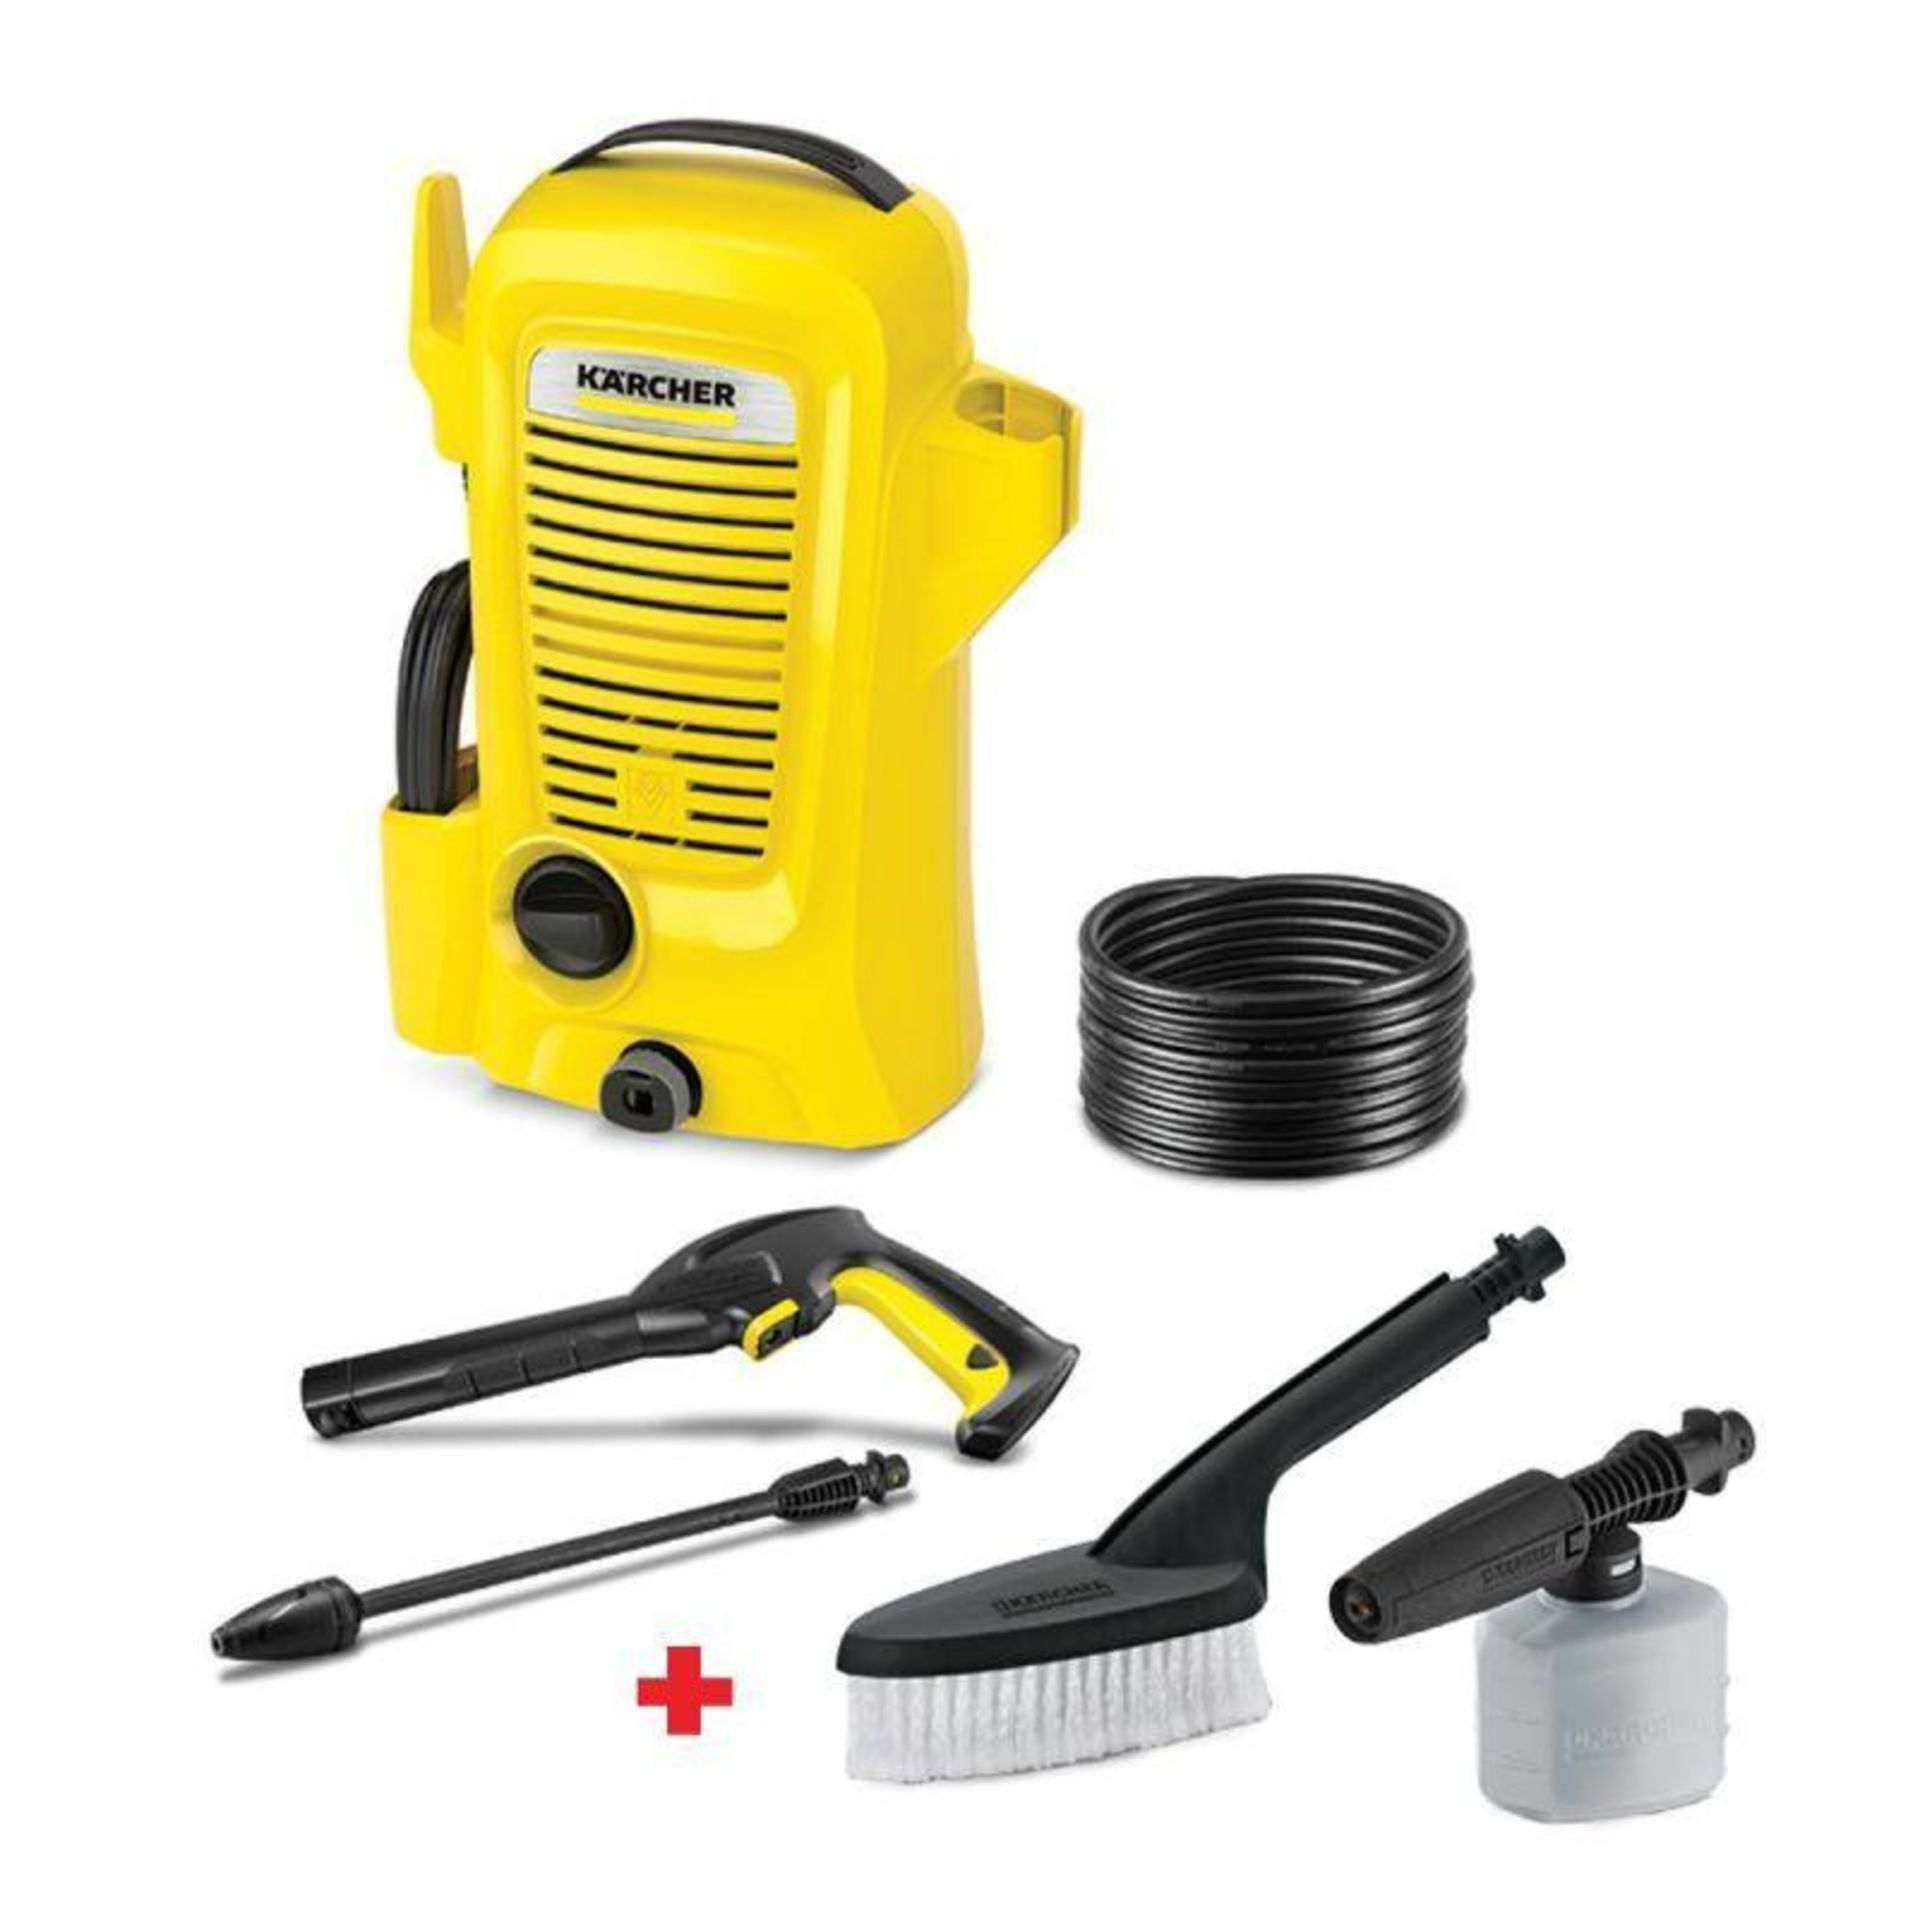 KÃ¤rcher K2 Basic Corded Pressure Washer 1.4kW (R45). Whether you want to clean dirty bicycles,